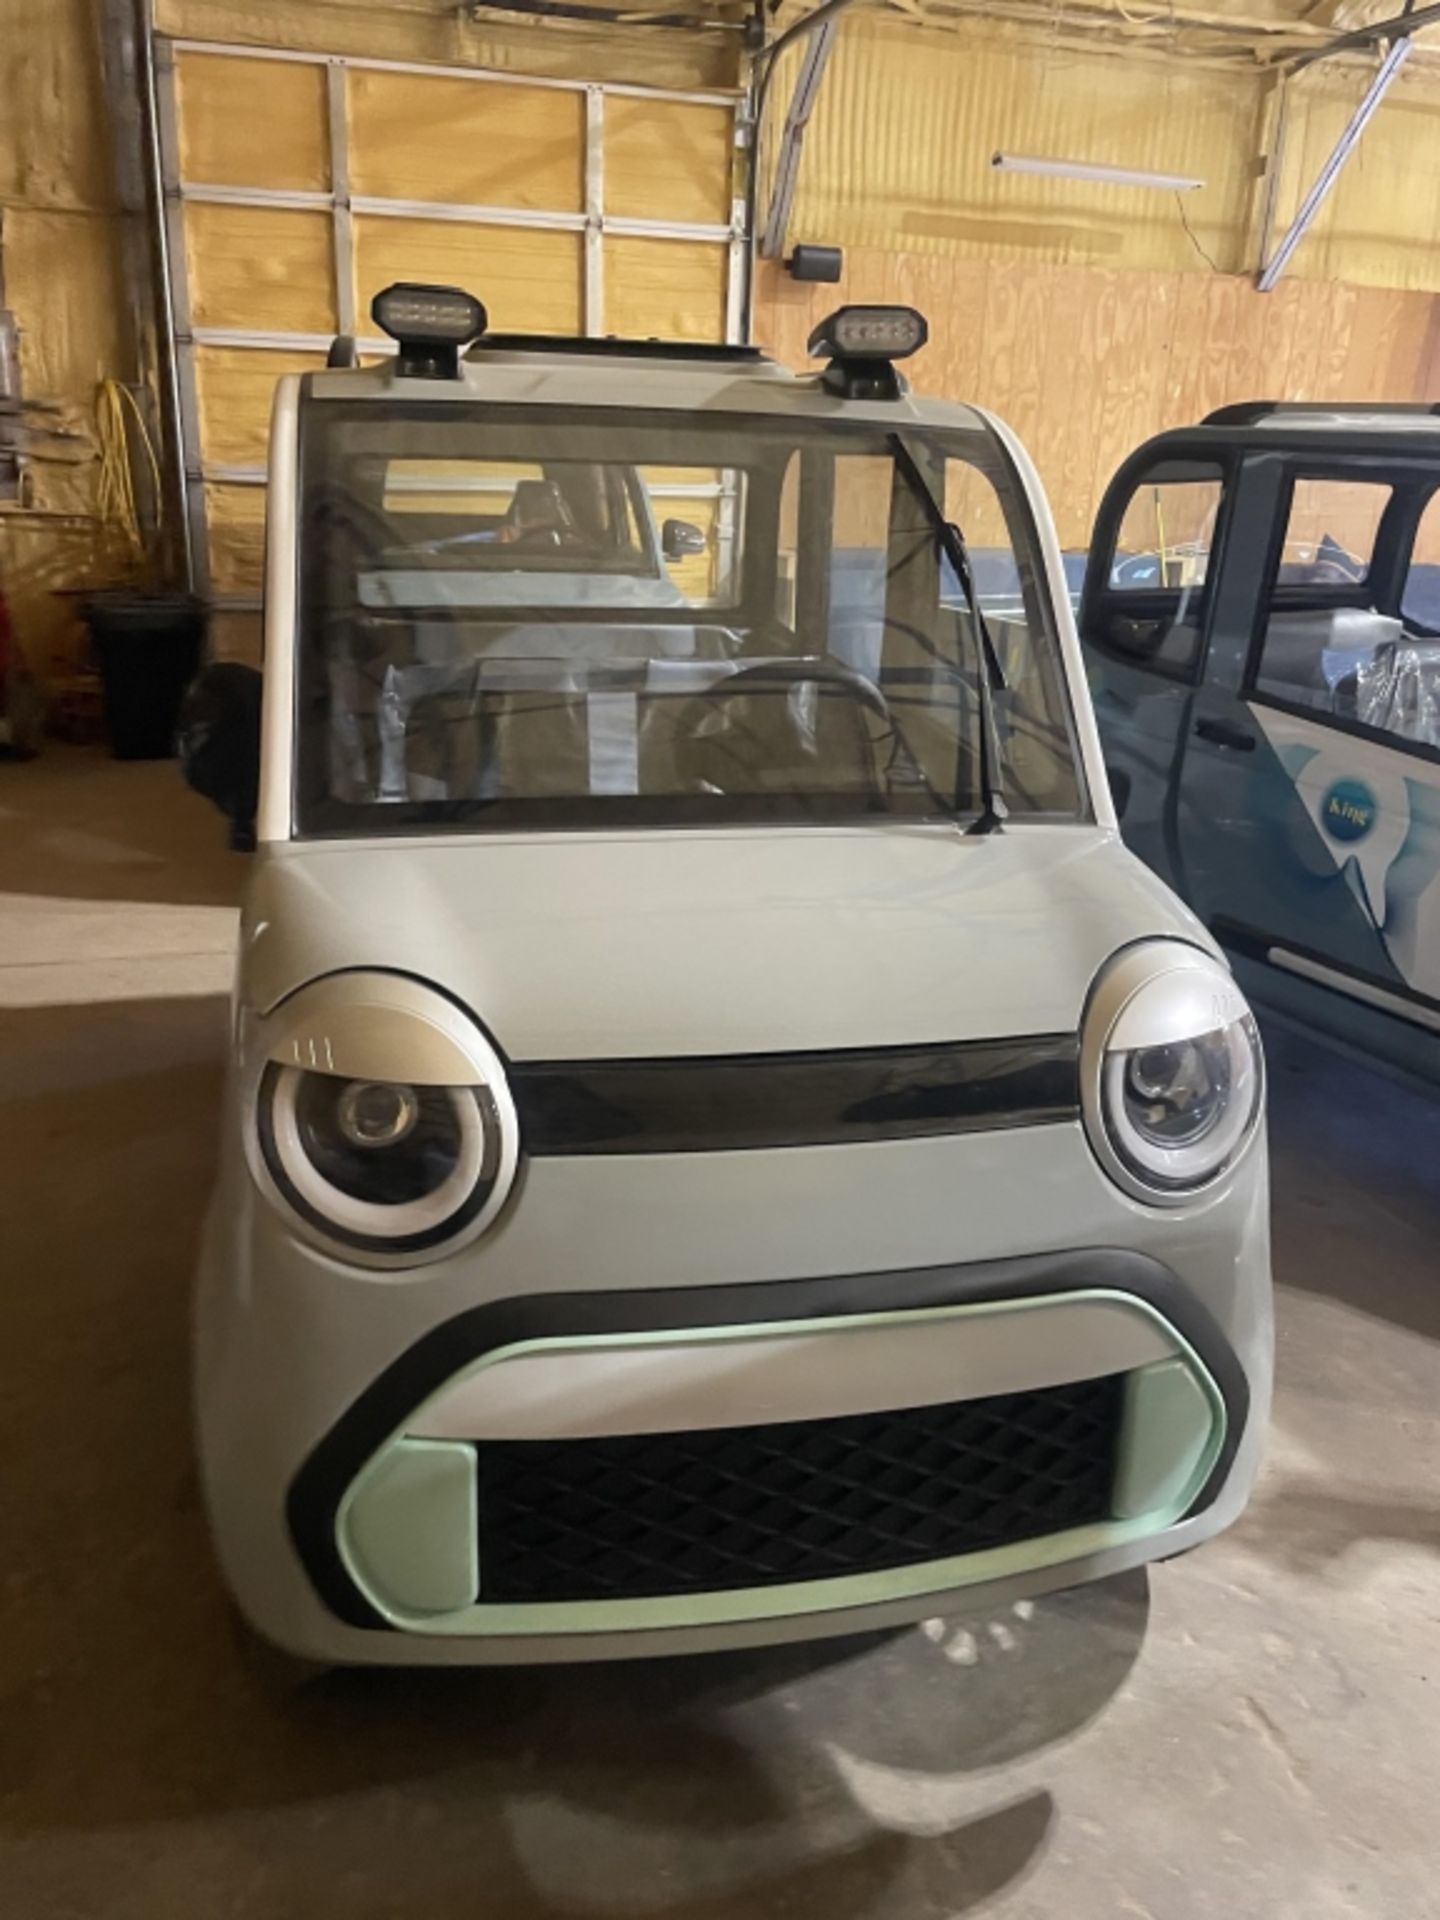 MECO M-F Electric Vehicle - Image 7 of 18